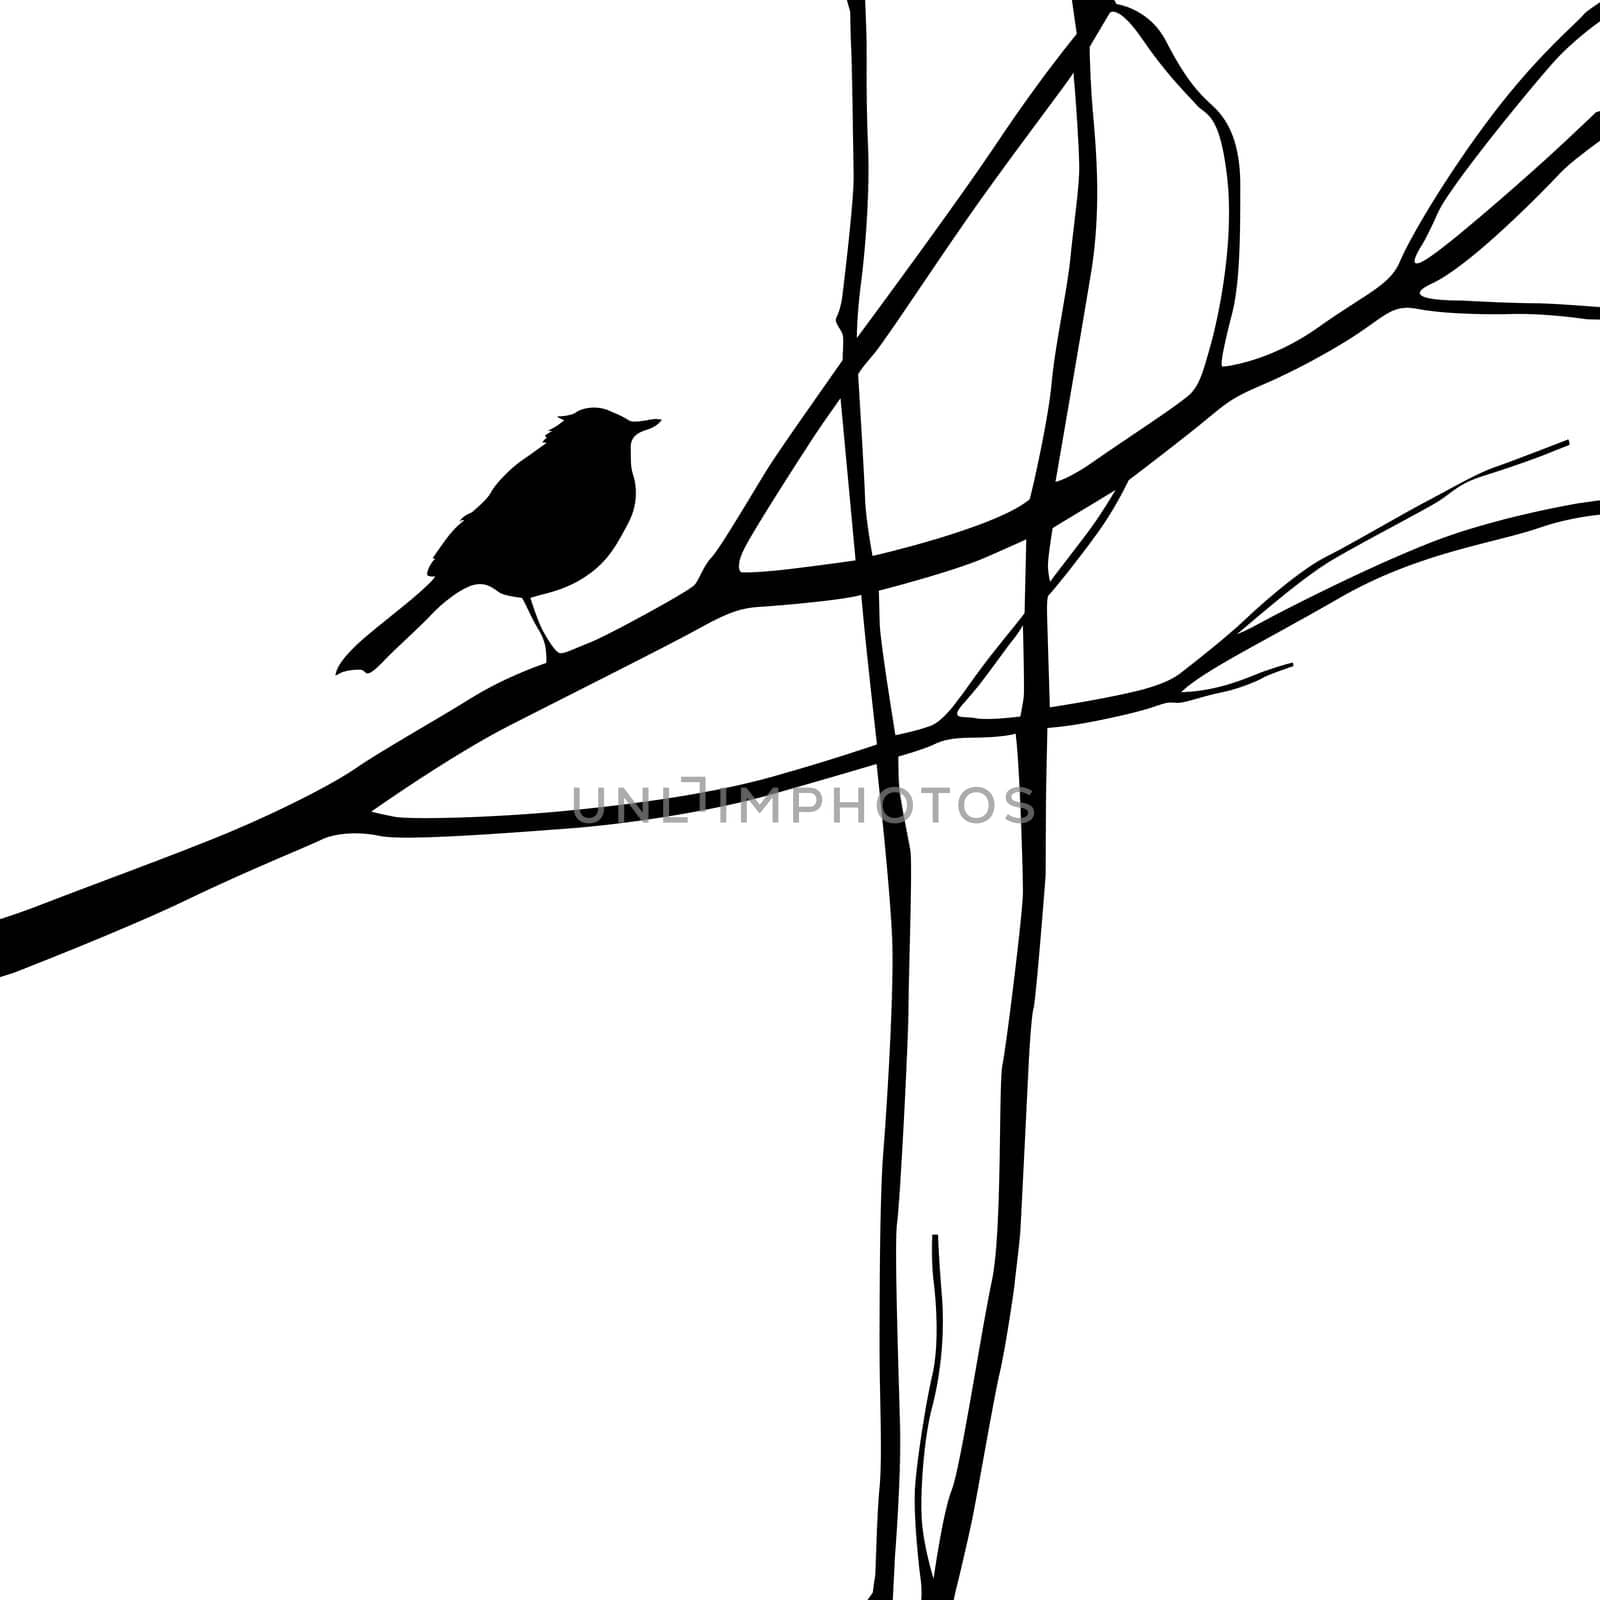 bird silhouette on wood branch by basel101658